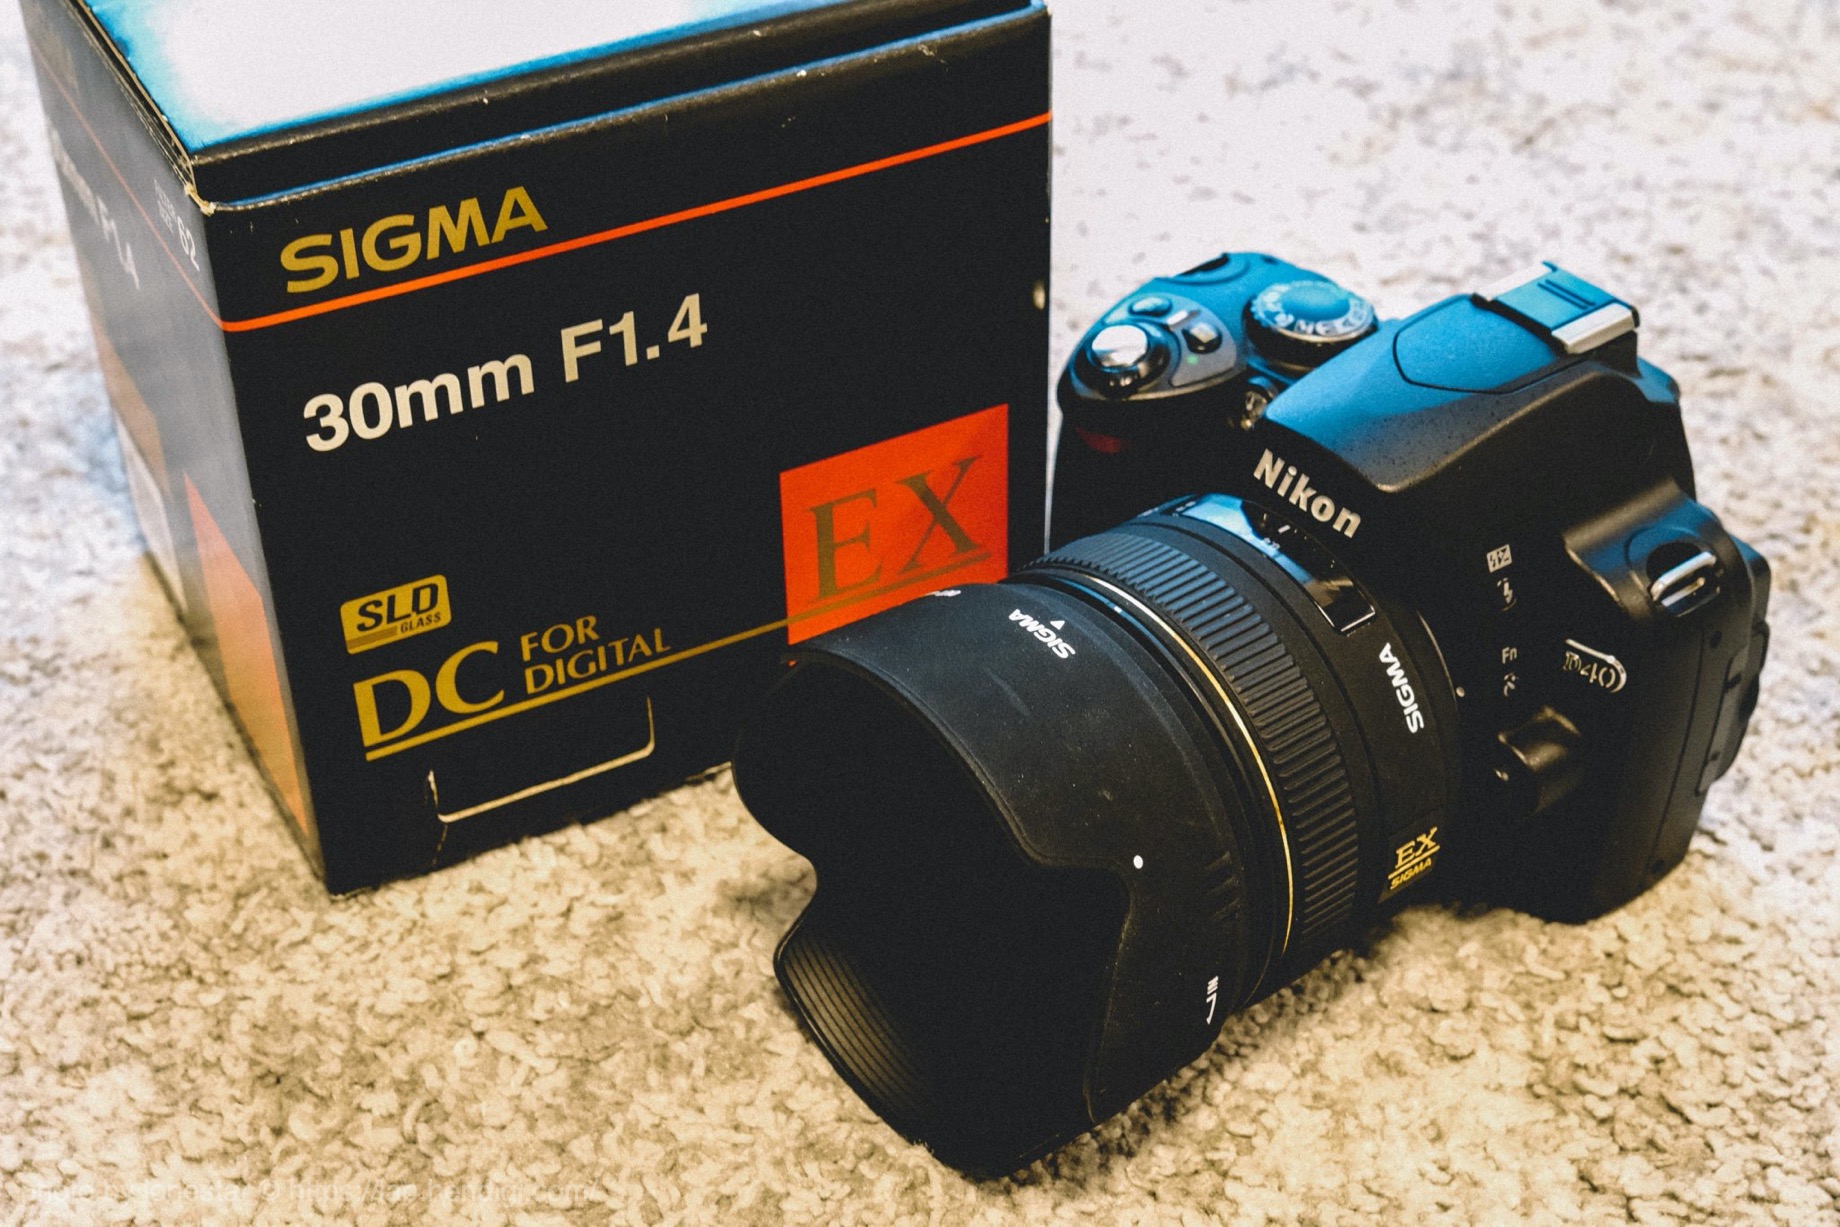 SIGMA 30mm F1.4 EX DC HSM ニコン | ncrouchphotography.com